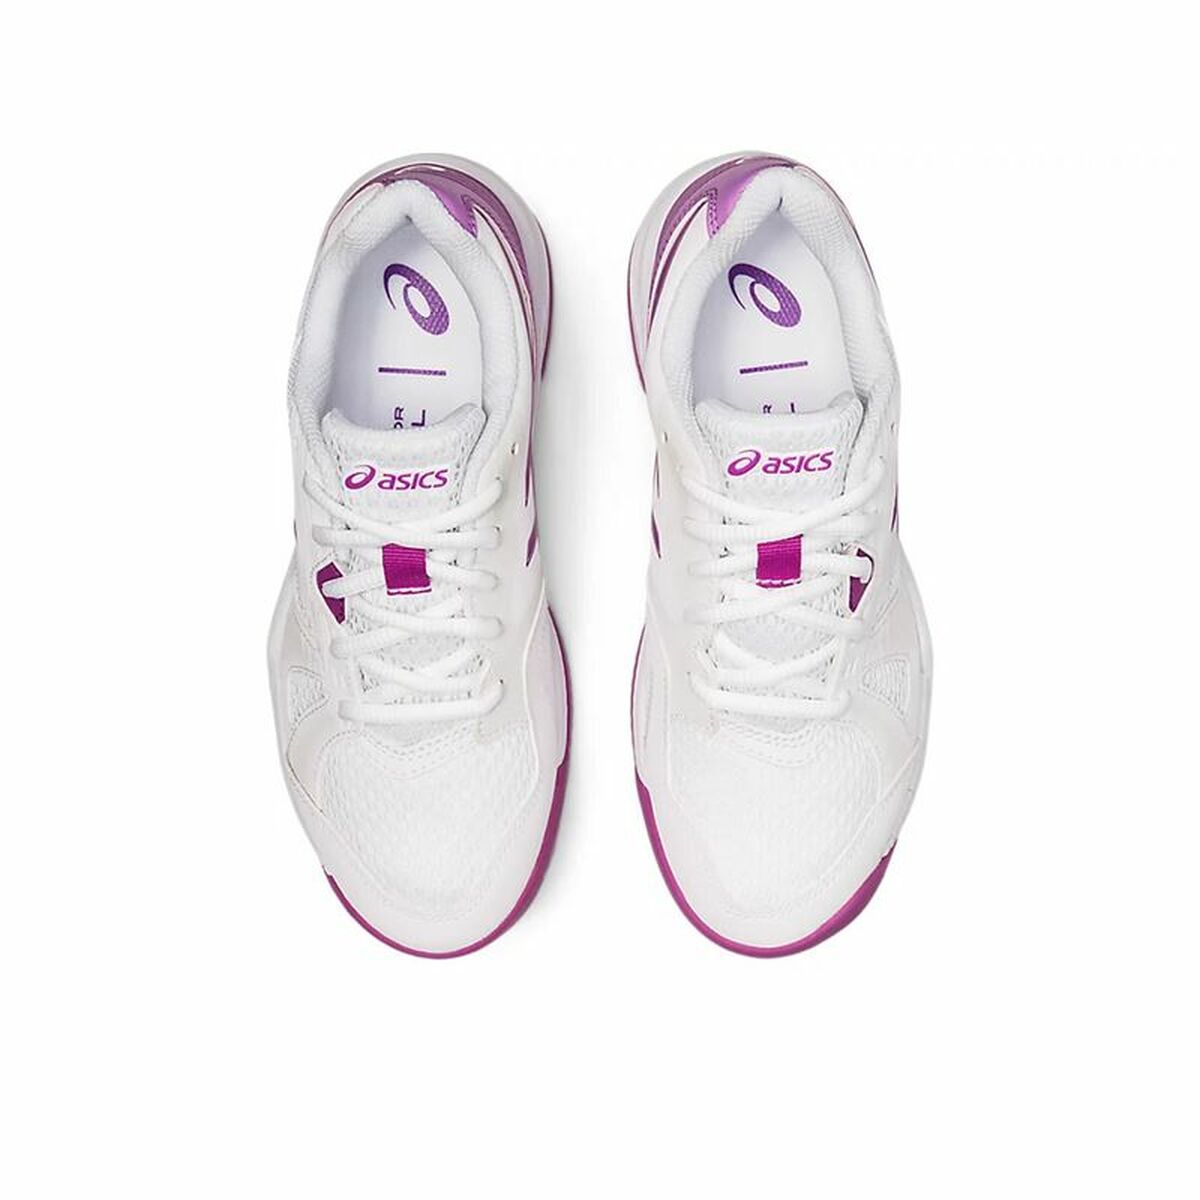 Sports Shoes for Kids Asics Gel-Padel Pro 5 Pink White